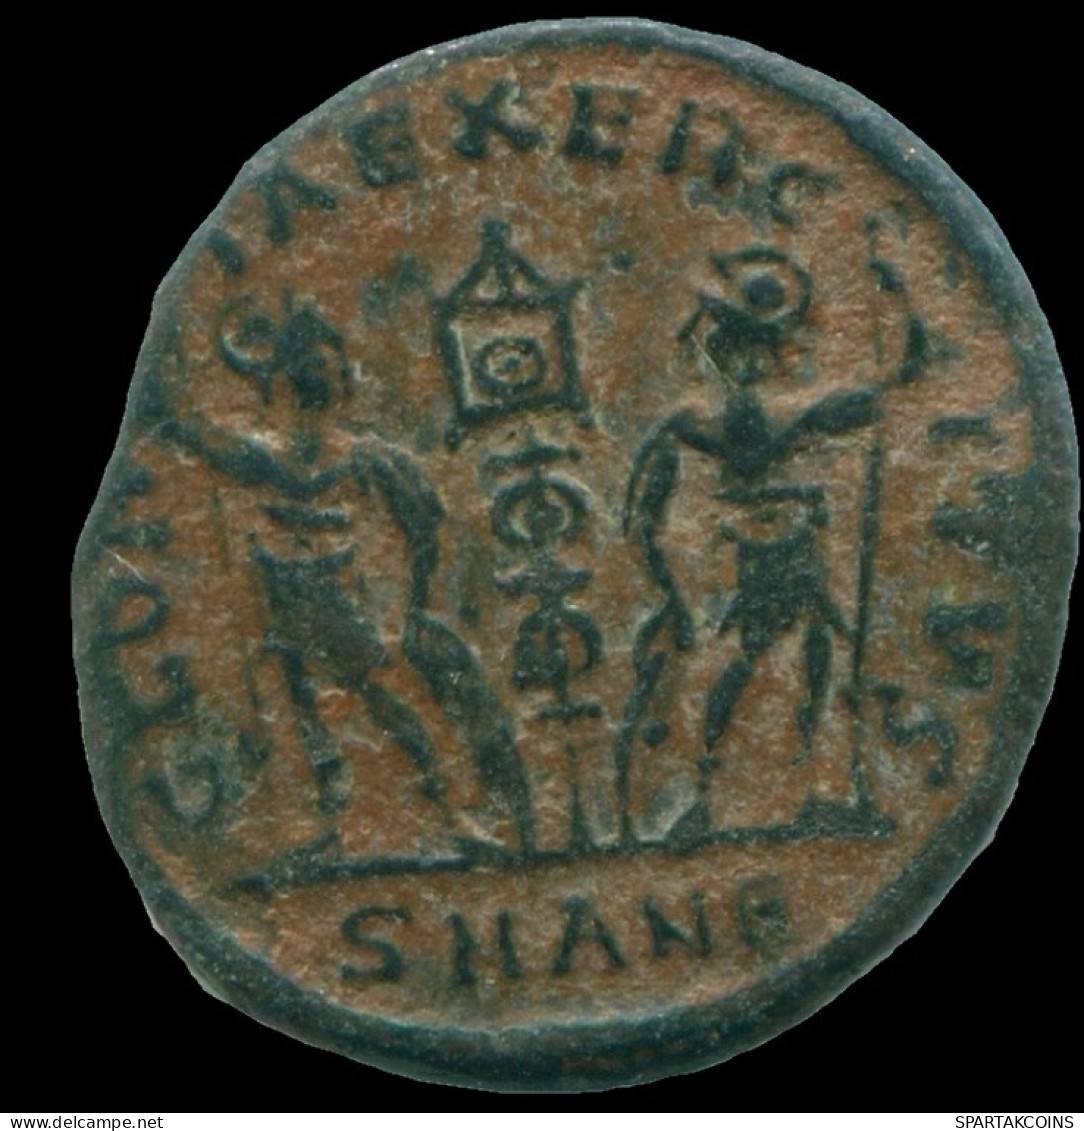 CONSTANTINE II ANTIOCH Mint ( SMAN ) GLORIA EXERCITVS SOLDIERS #ANC13190.18.E.A - The Christian Empire (307 AD To 363 AD)